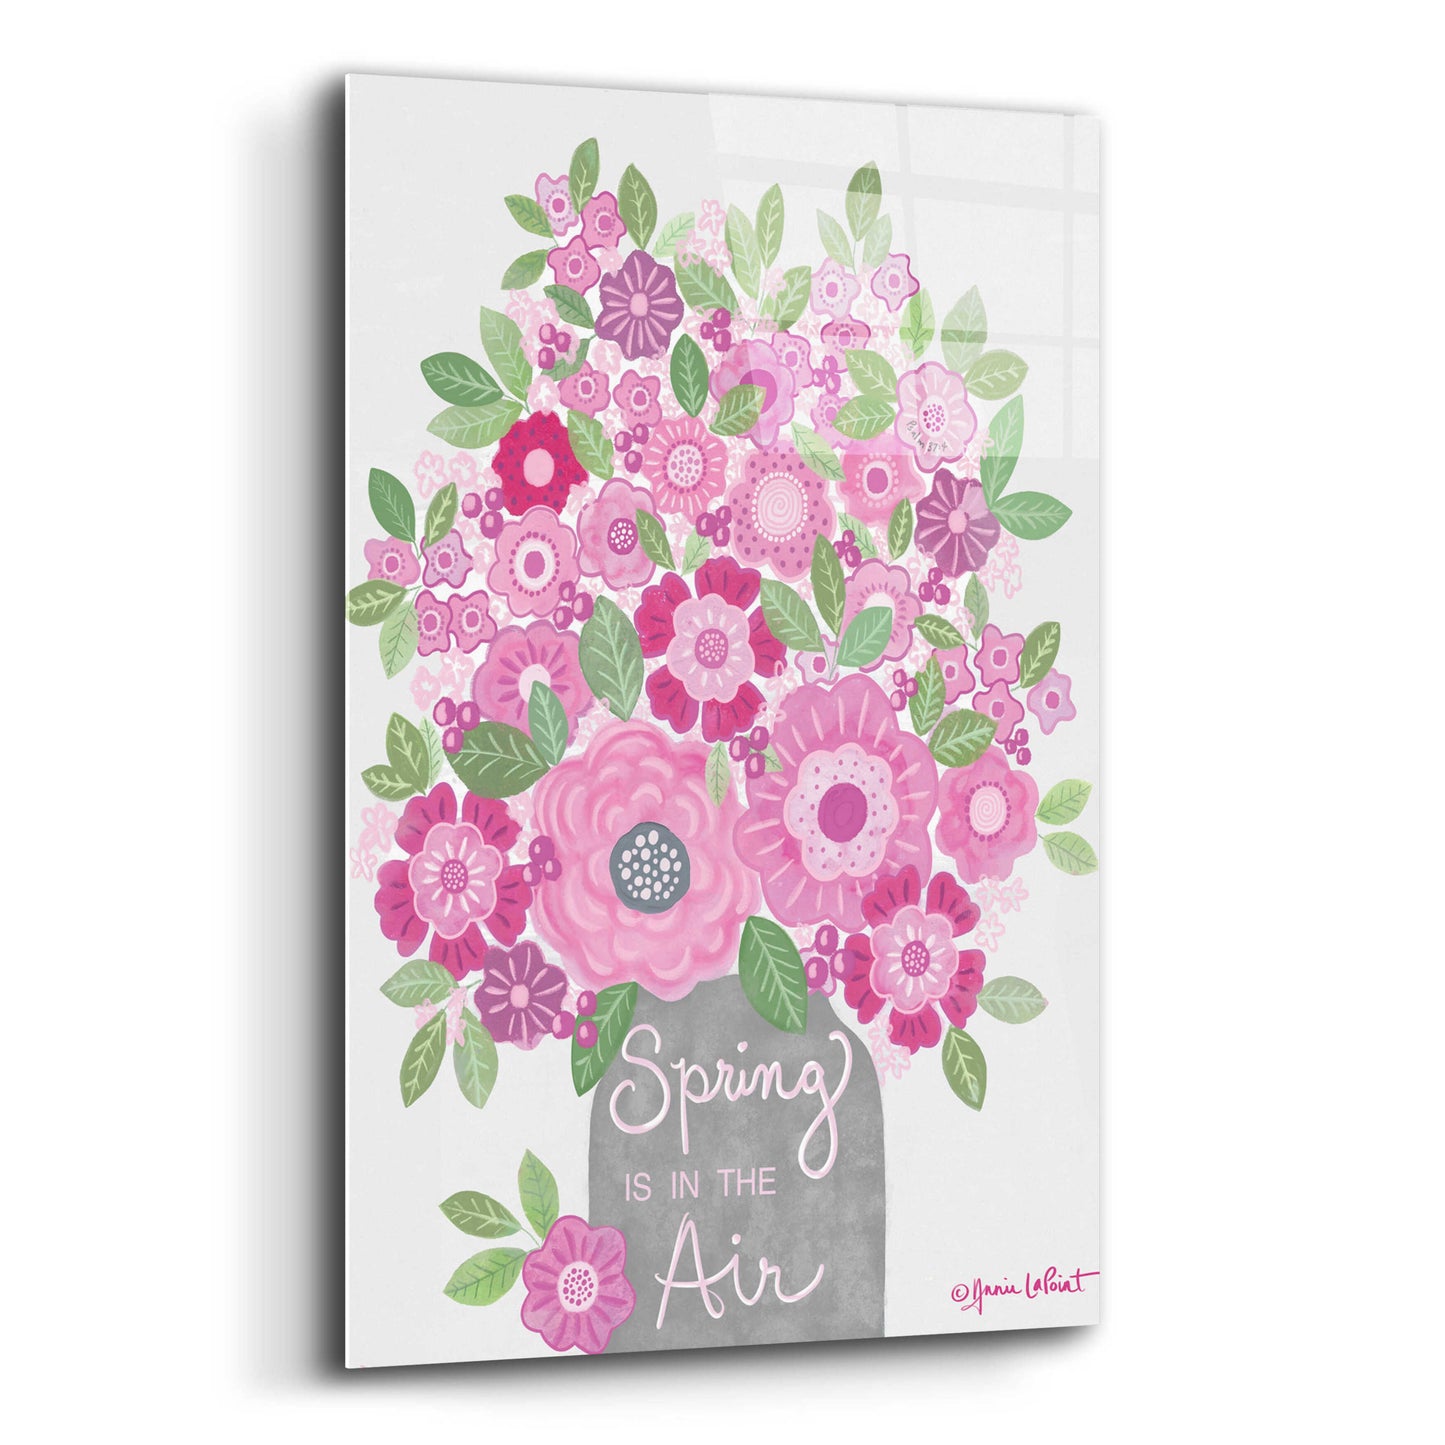 Epic Art 'Spring is in the Air' by Annie LaPoint, Acrylic Glass Wall Art,12x16